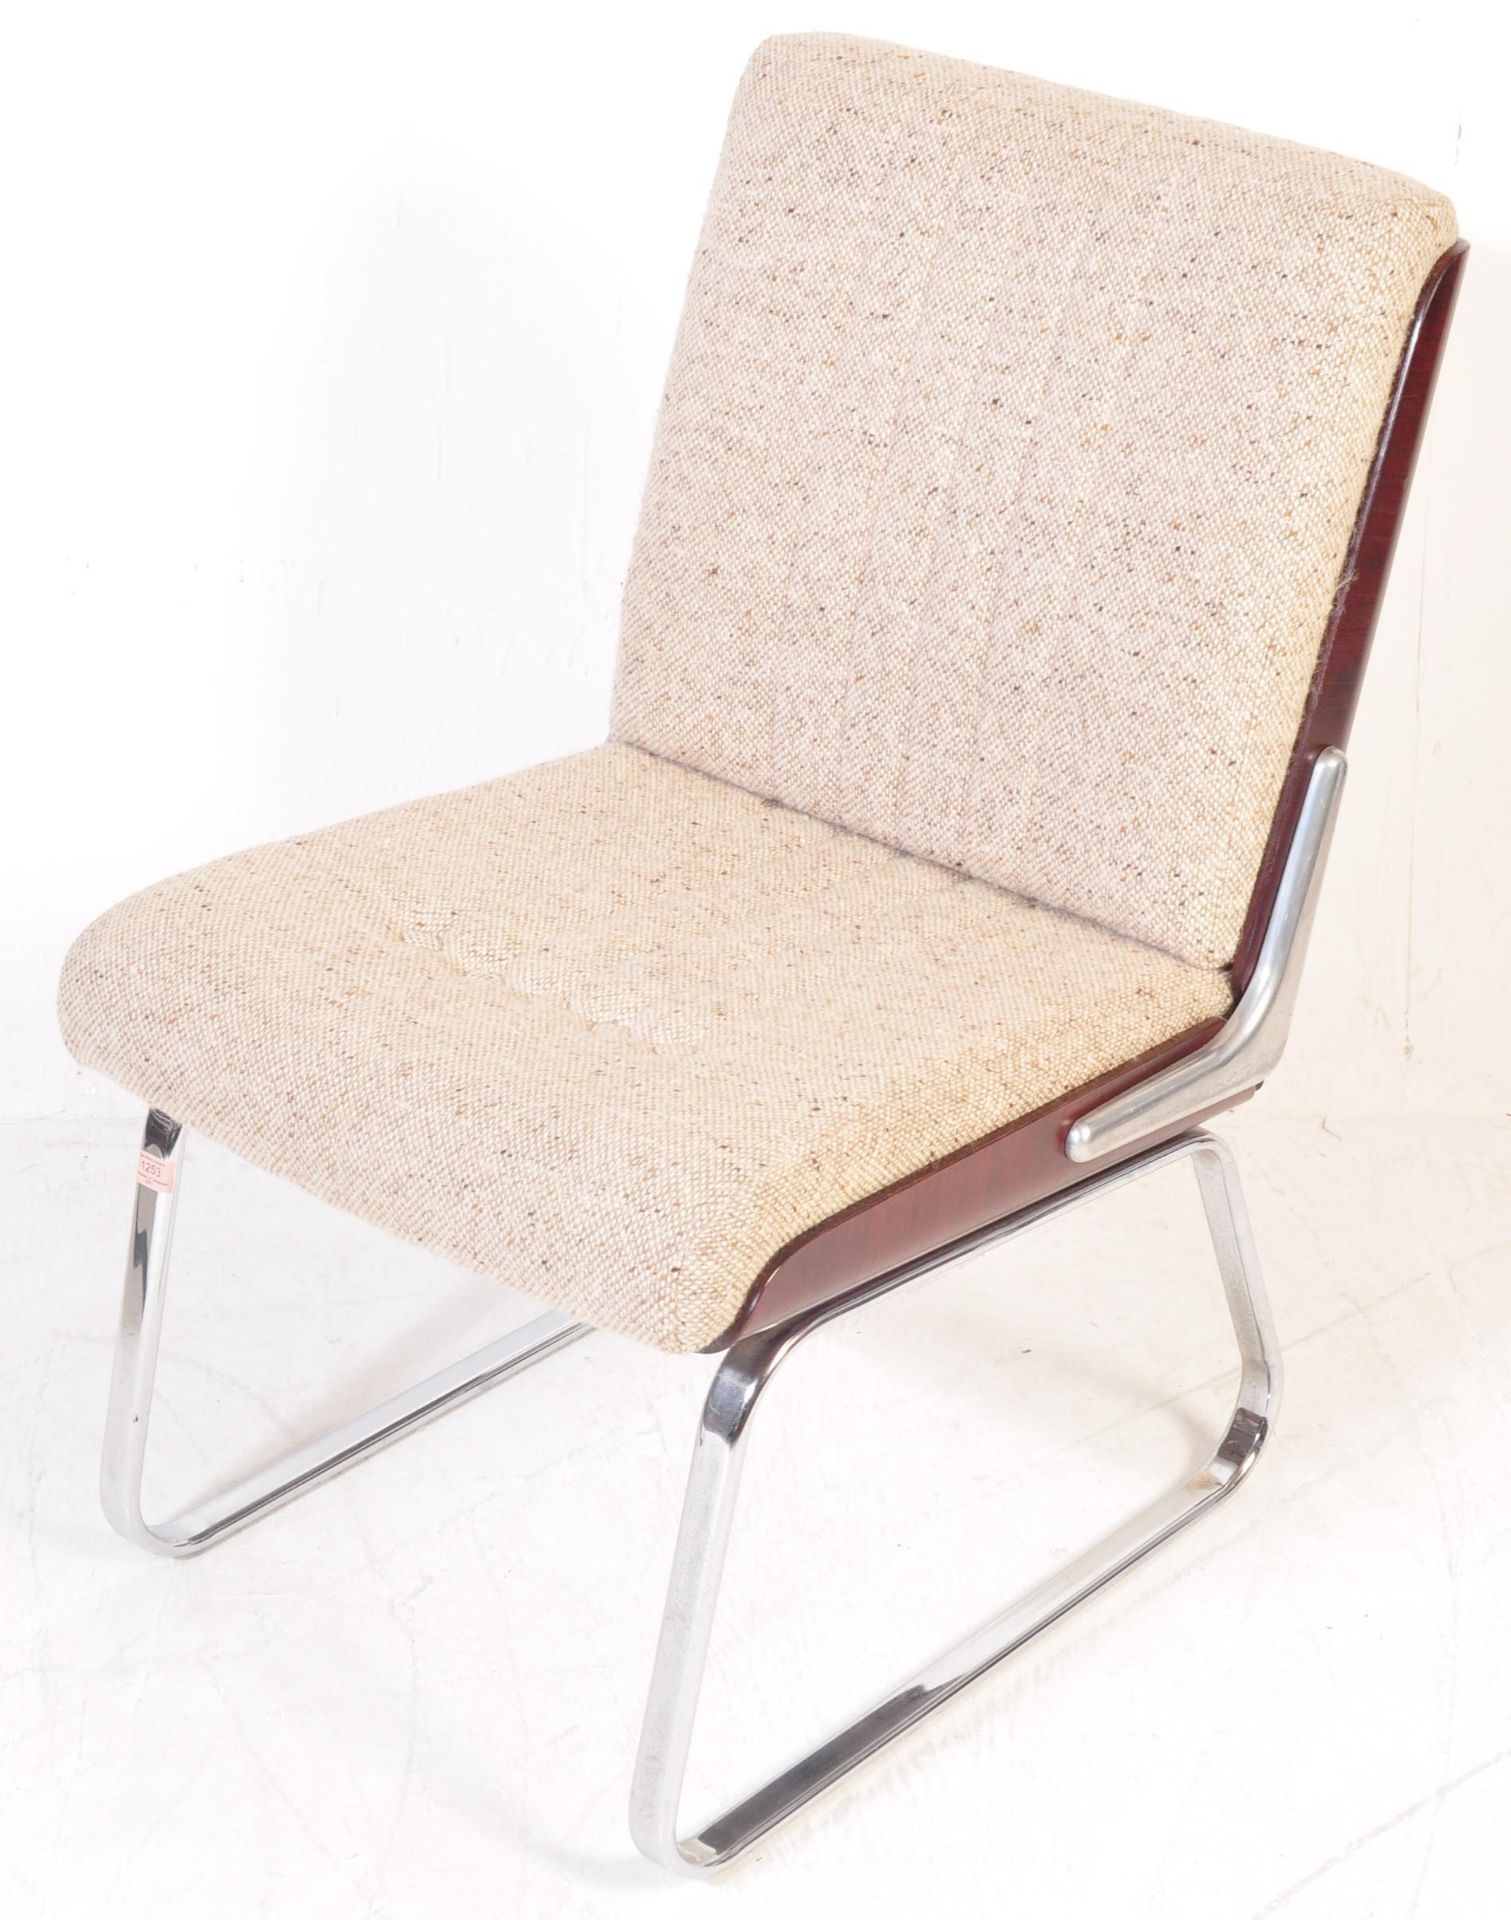 ORIGINAL VINTAGE GORDON RUSSELL OFFICE CHAIR - Image 2 of 7